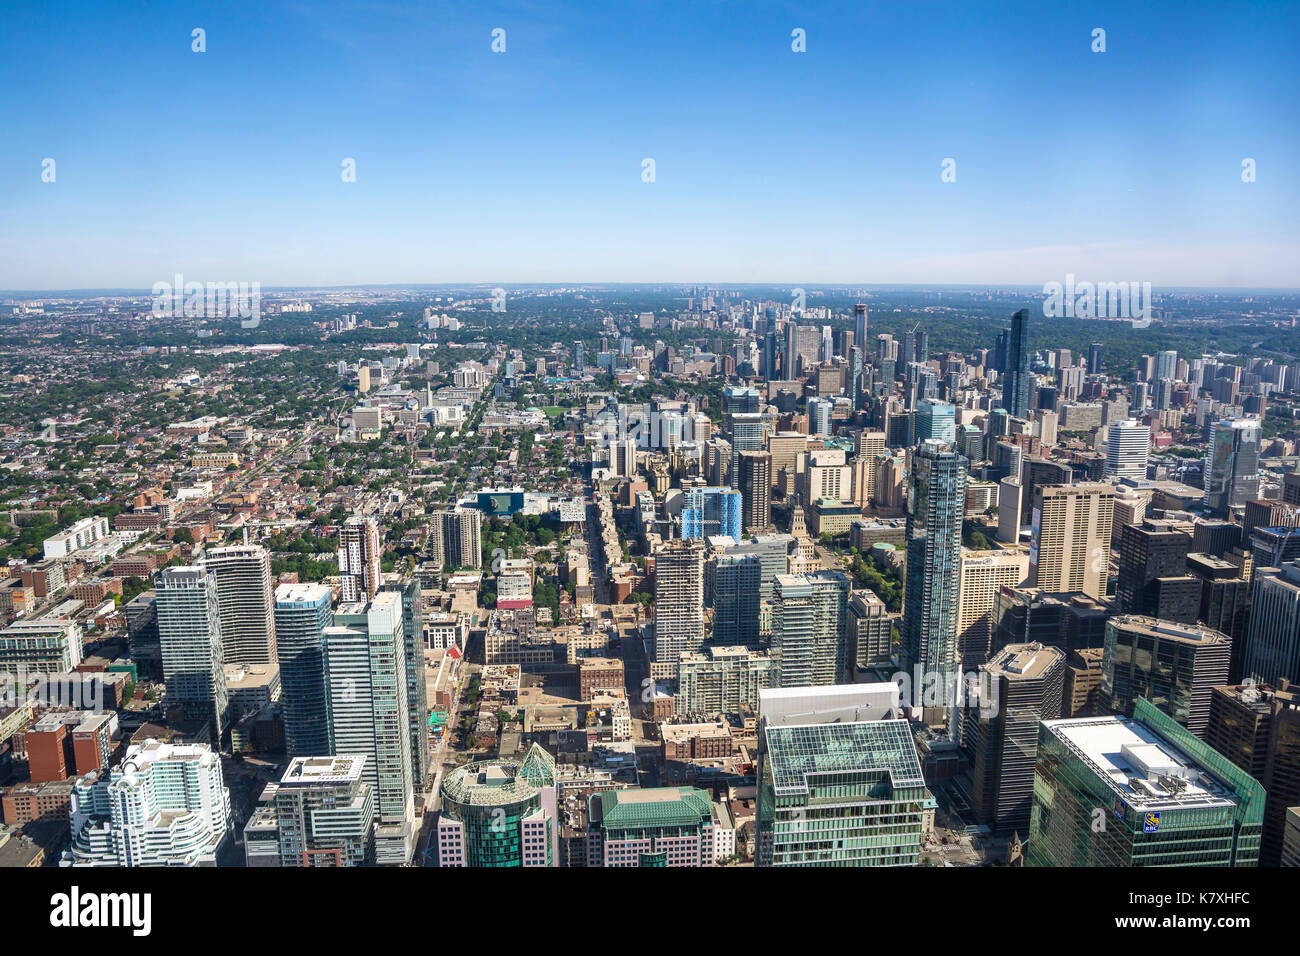 Toronto,Canada-august 2,2015:view of Toronto city skyline from the top of the Cn tower during a sunny day. Stock Photo